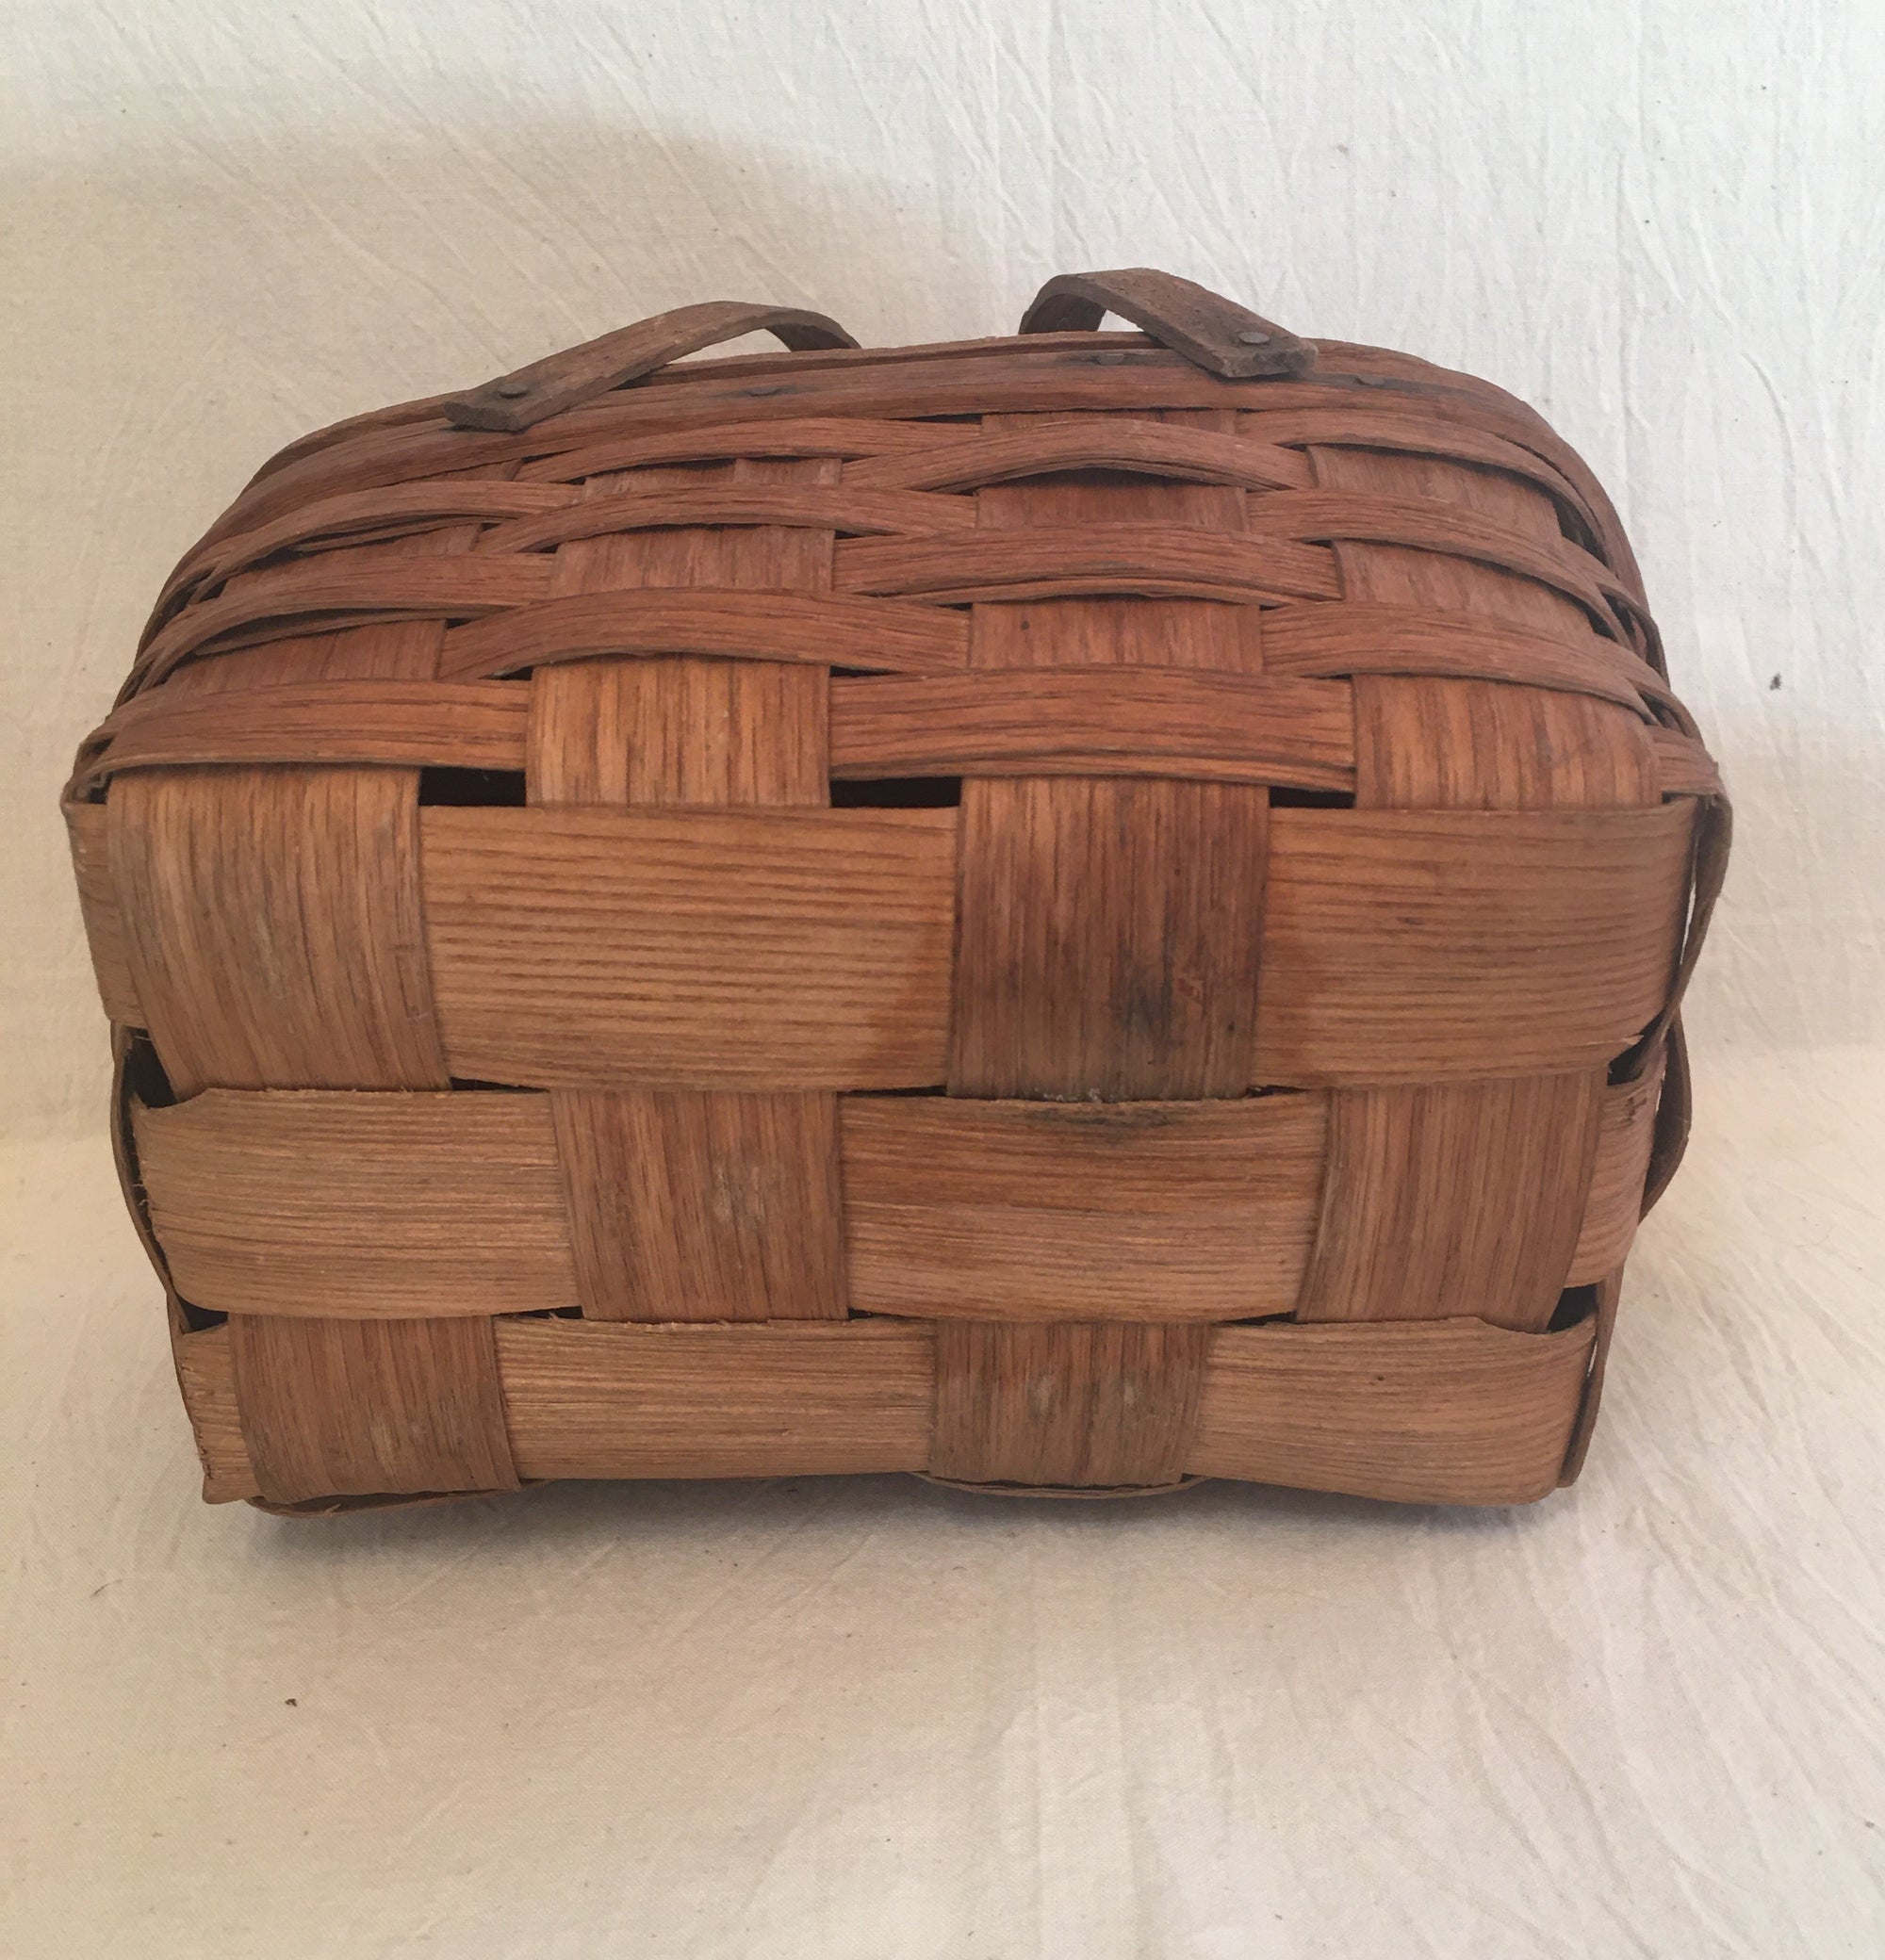 Early 1900’s Child’s Picnic Basket/Lunch Basket (Very Small!)